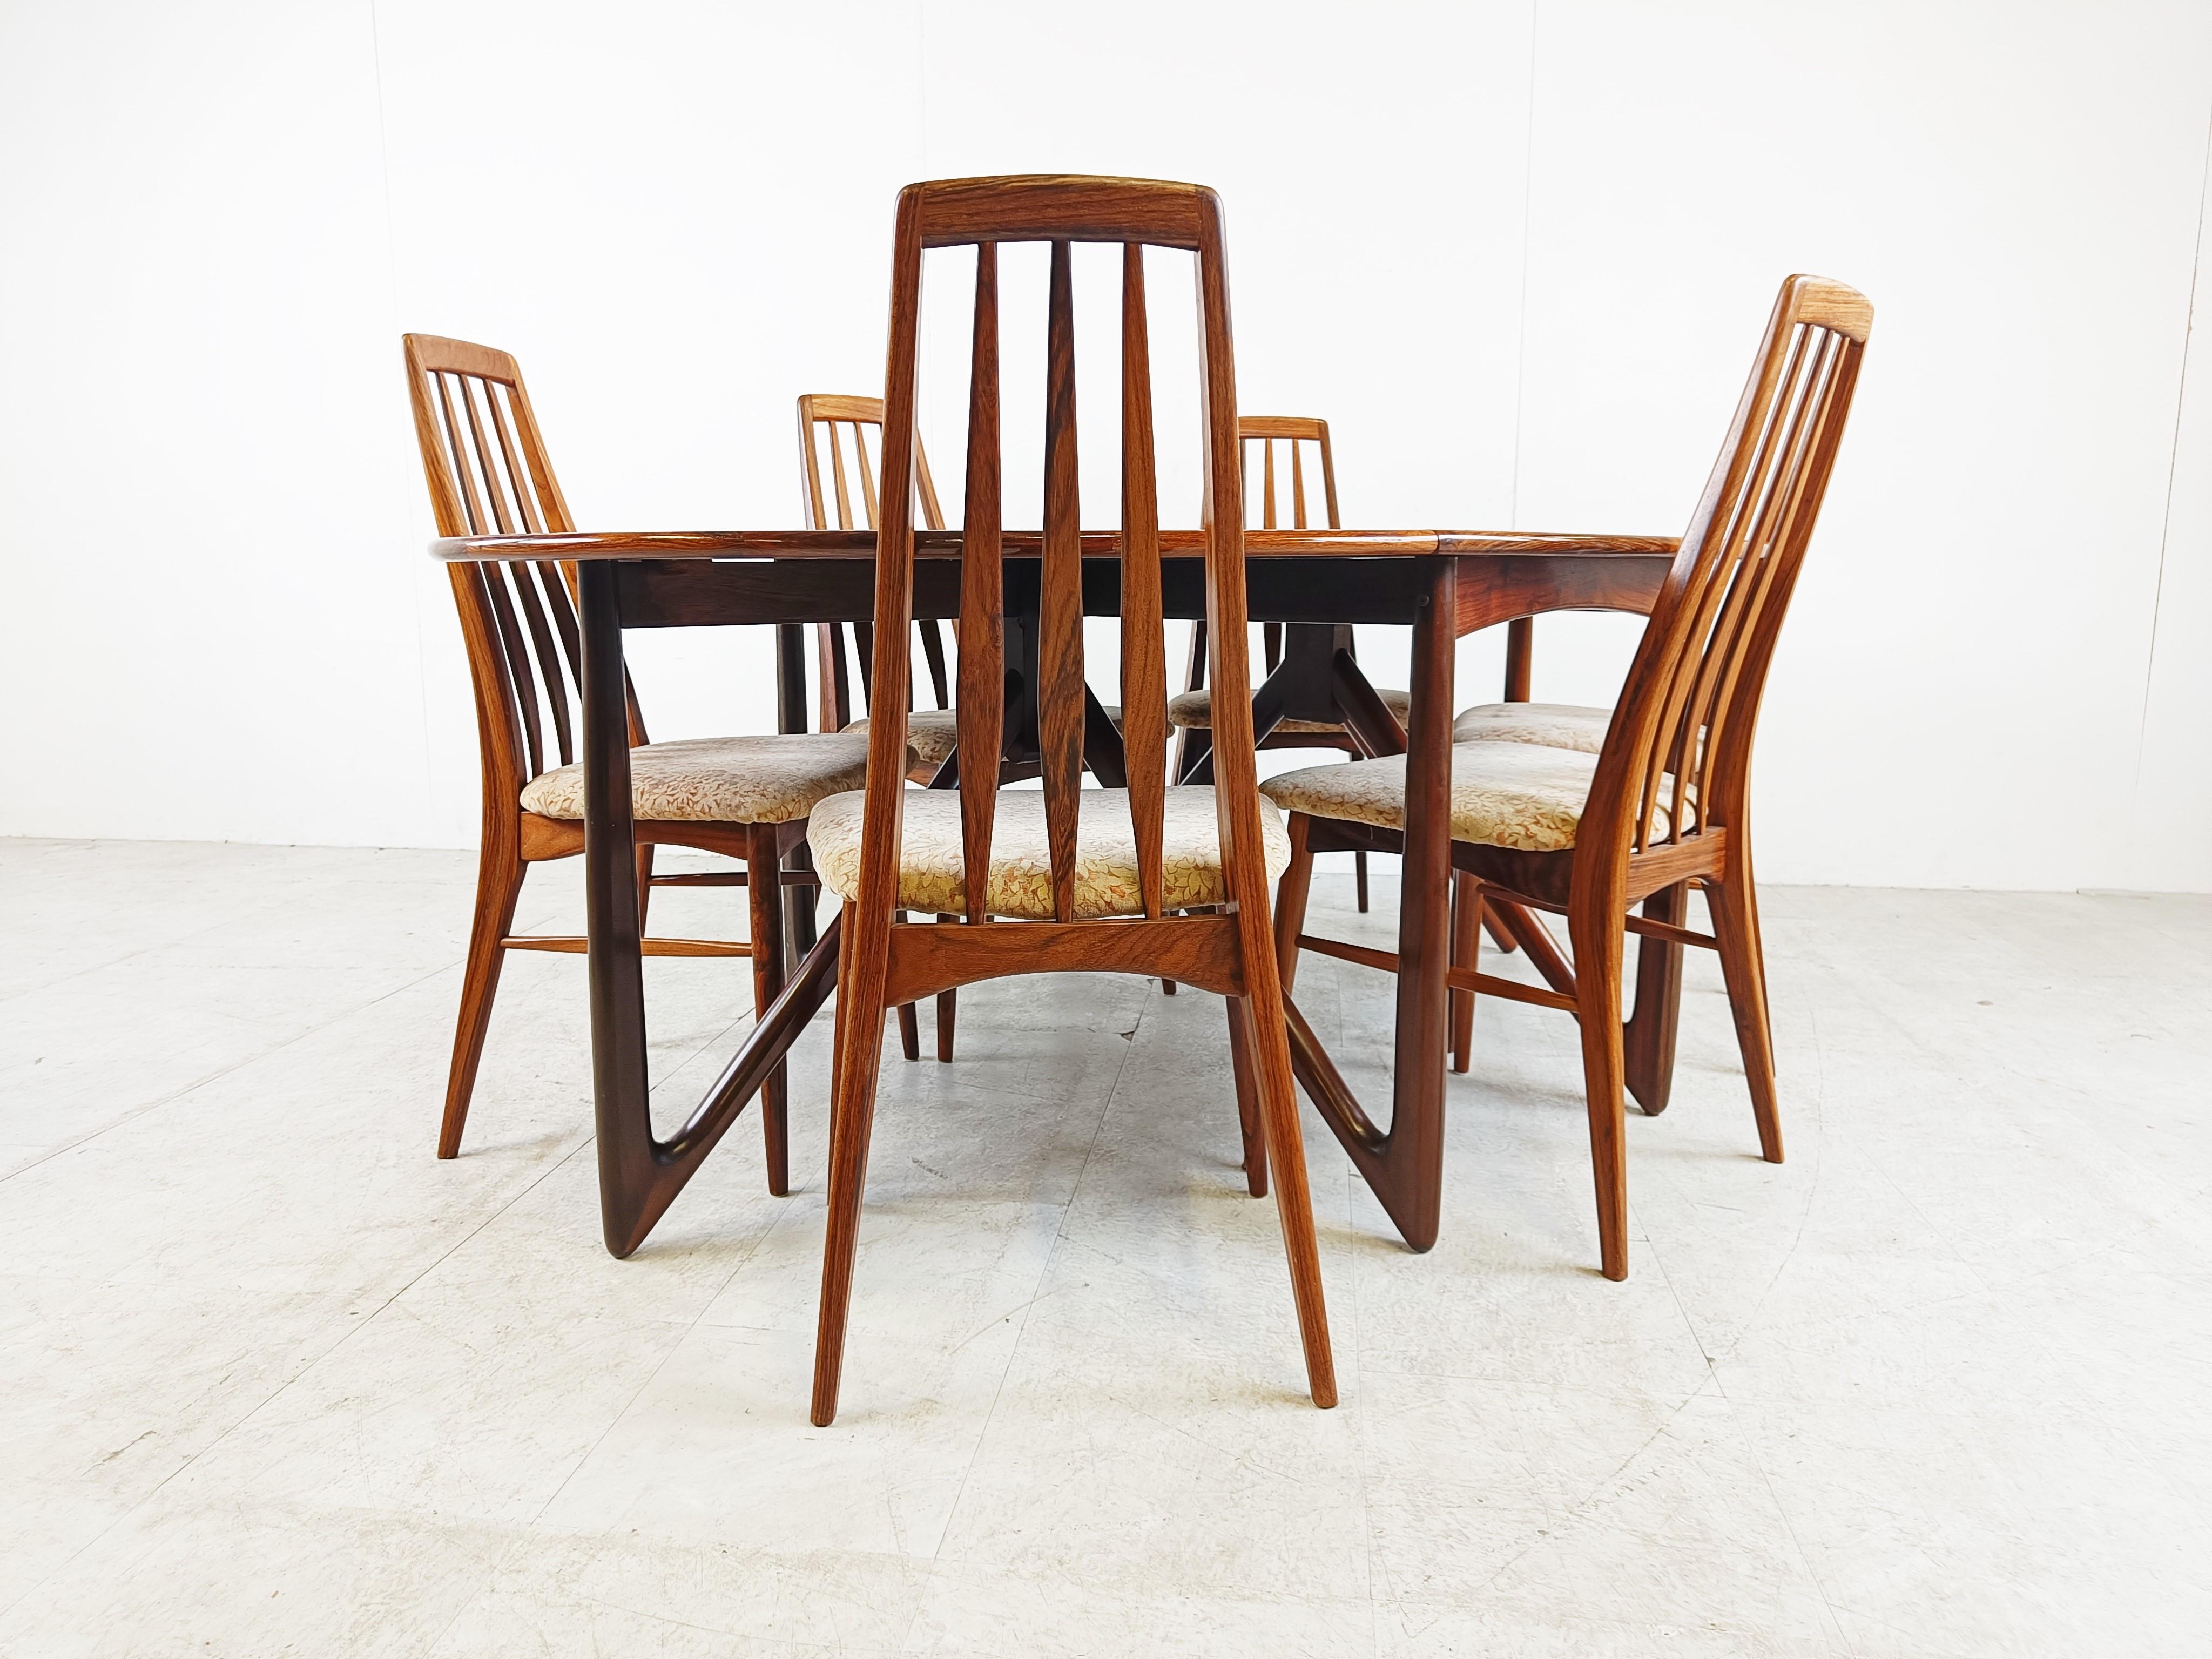 Mid century rosewood 'Eva' dining chairs with original period upholstery. We can upholster the seats in other plain fabrics or bouclé fabric as well. - Contact us for info. 

The chairs are made with an eye for detail and every piece of the chairs